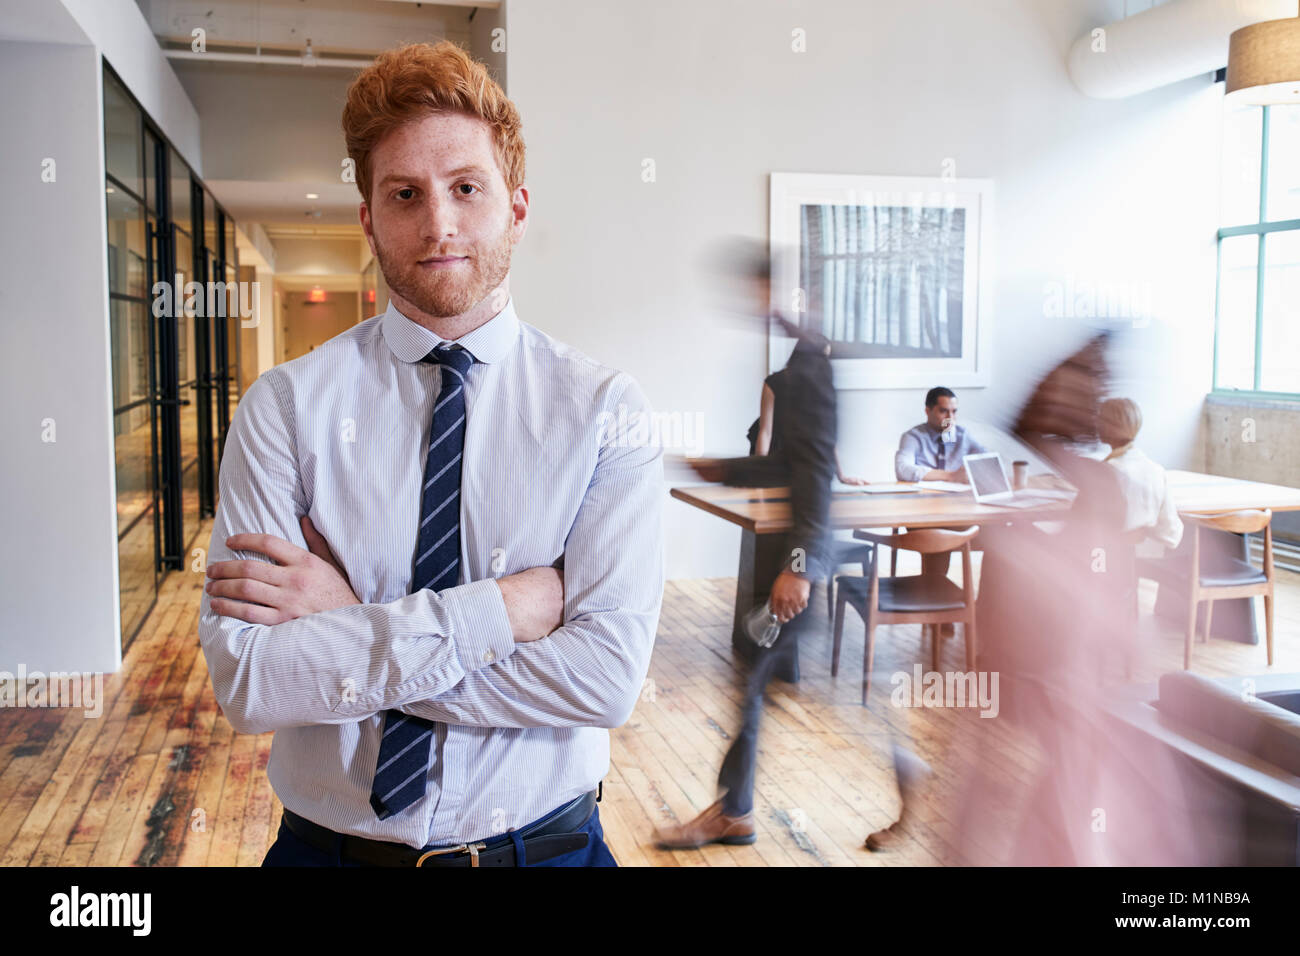 Portrait of young red haired man in a busy modern workplace Stock Photo